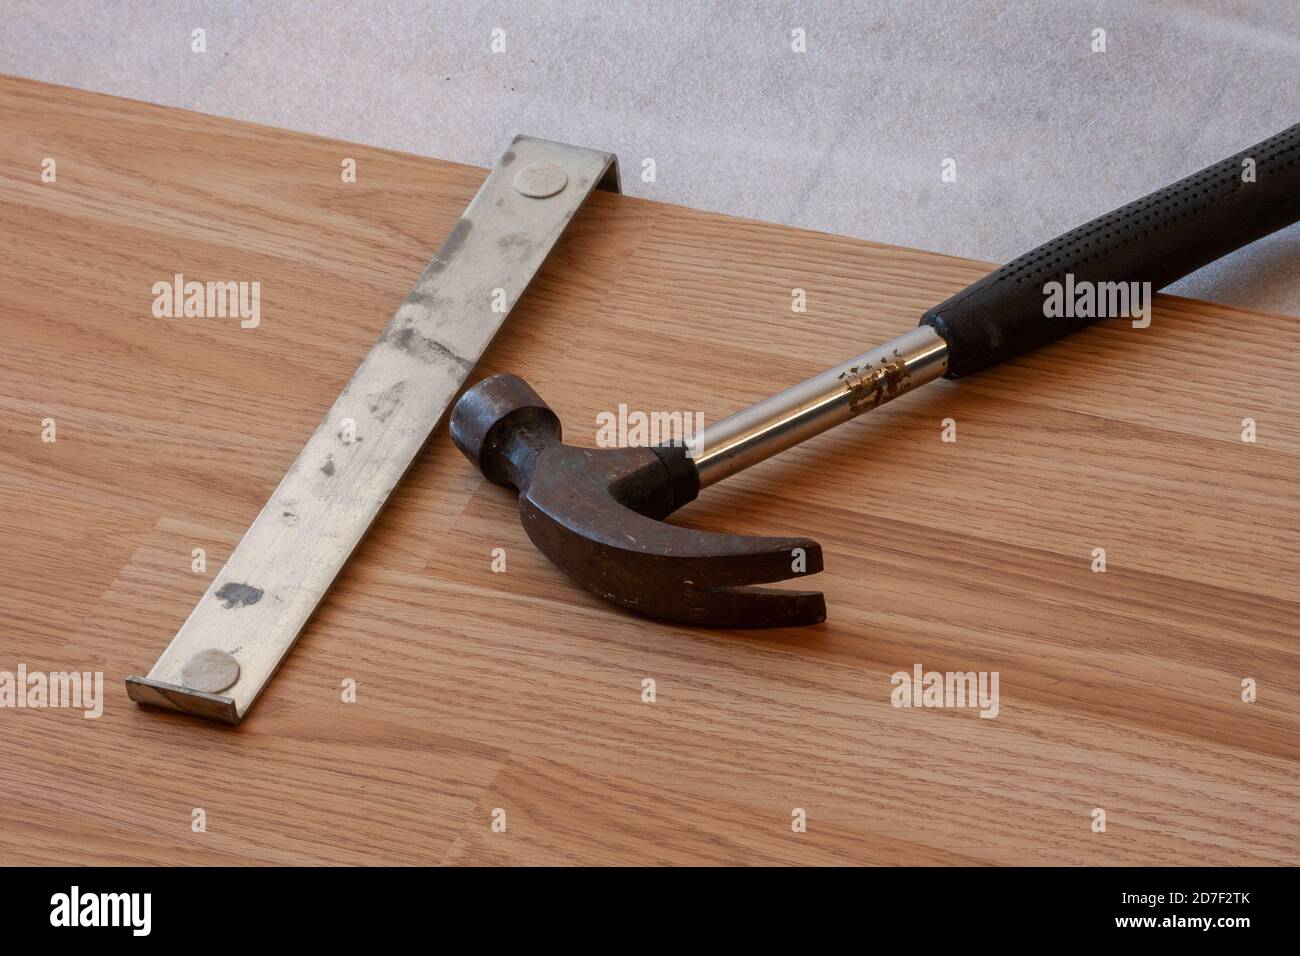 Tools for installation of a laminate floor. Stock Photo